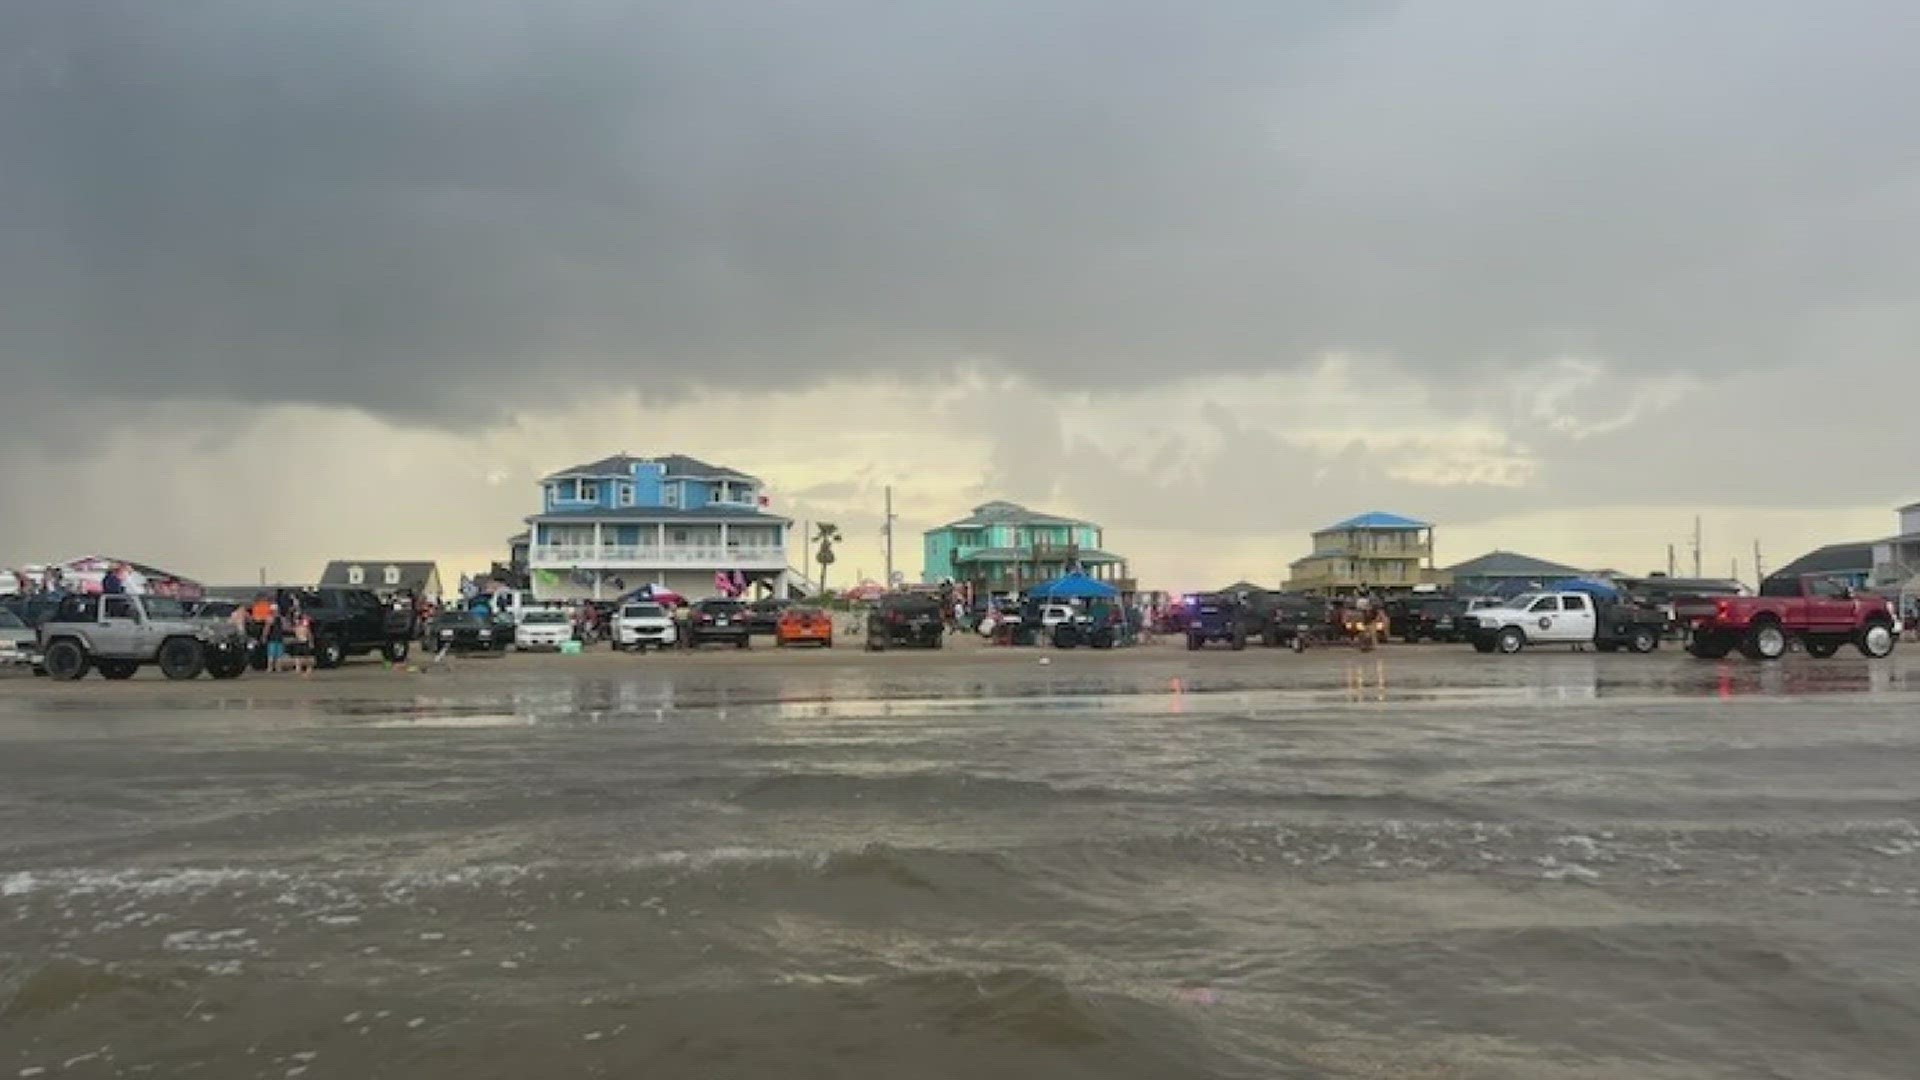 "We've had no fatalities as of yet and we had no injured officers. I call that a successful jeep beach weekend," said Galveston County Major Ray Nolan.